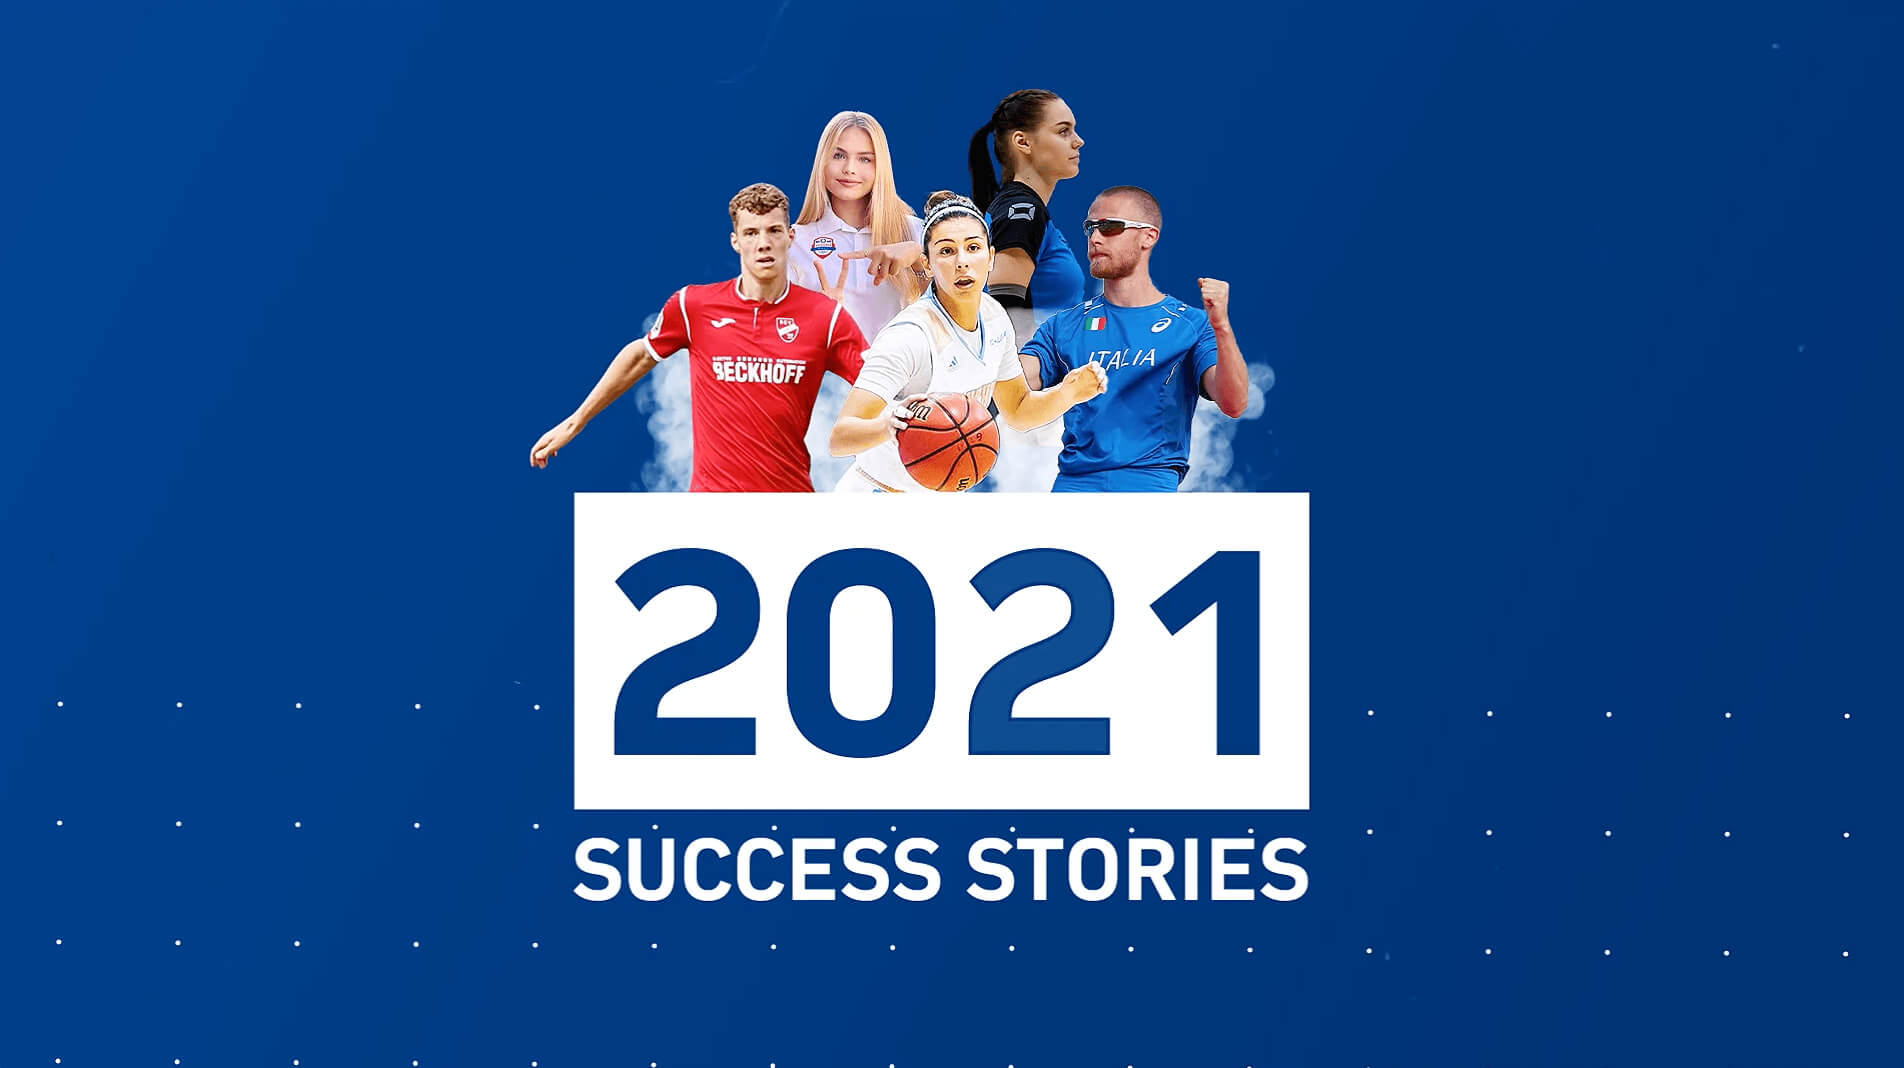 You are currently viewing Success Stories 2021